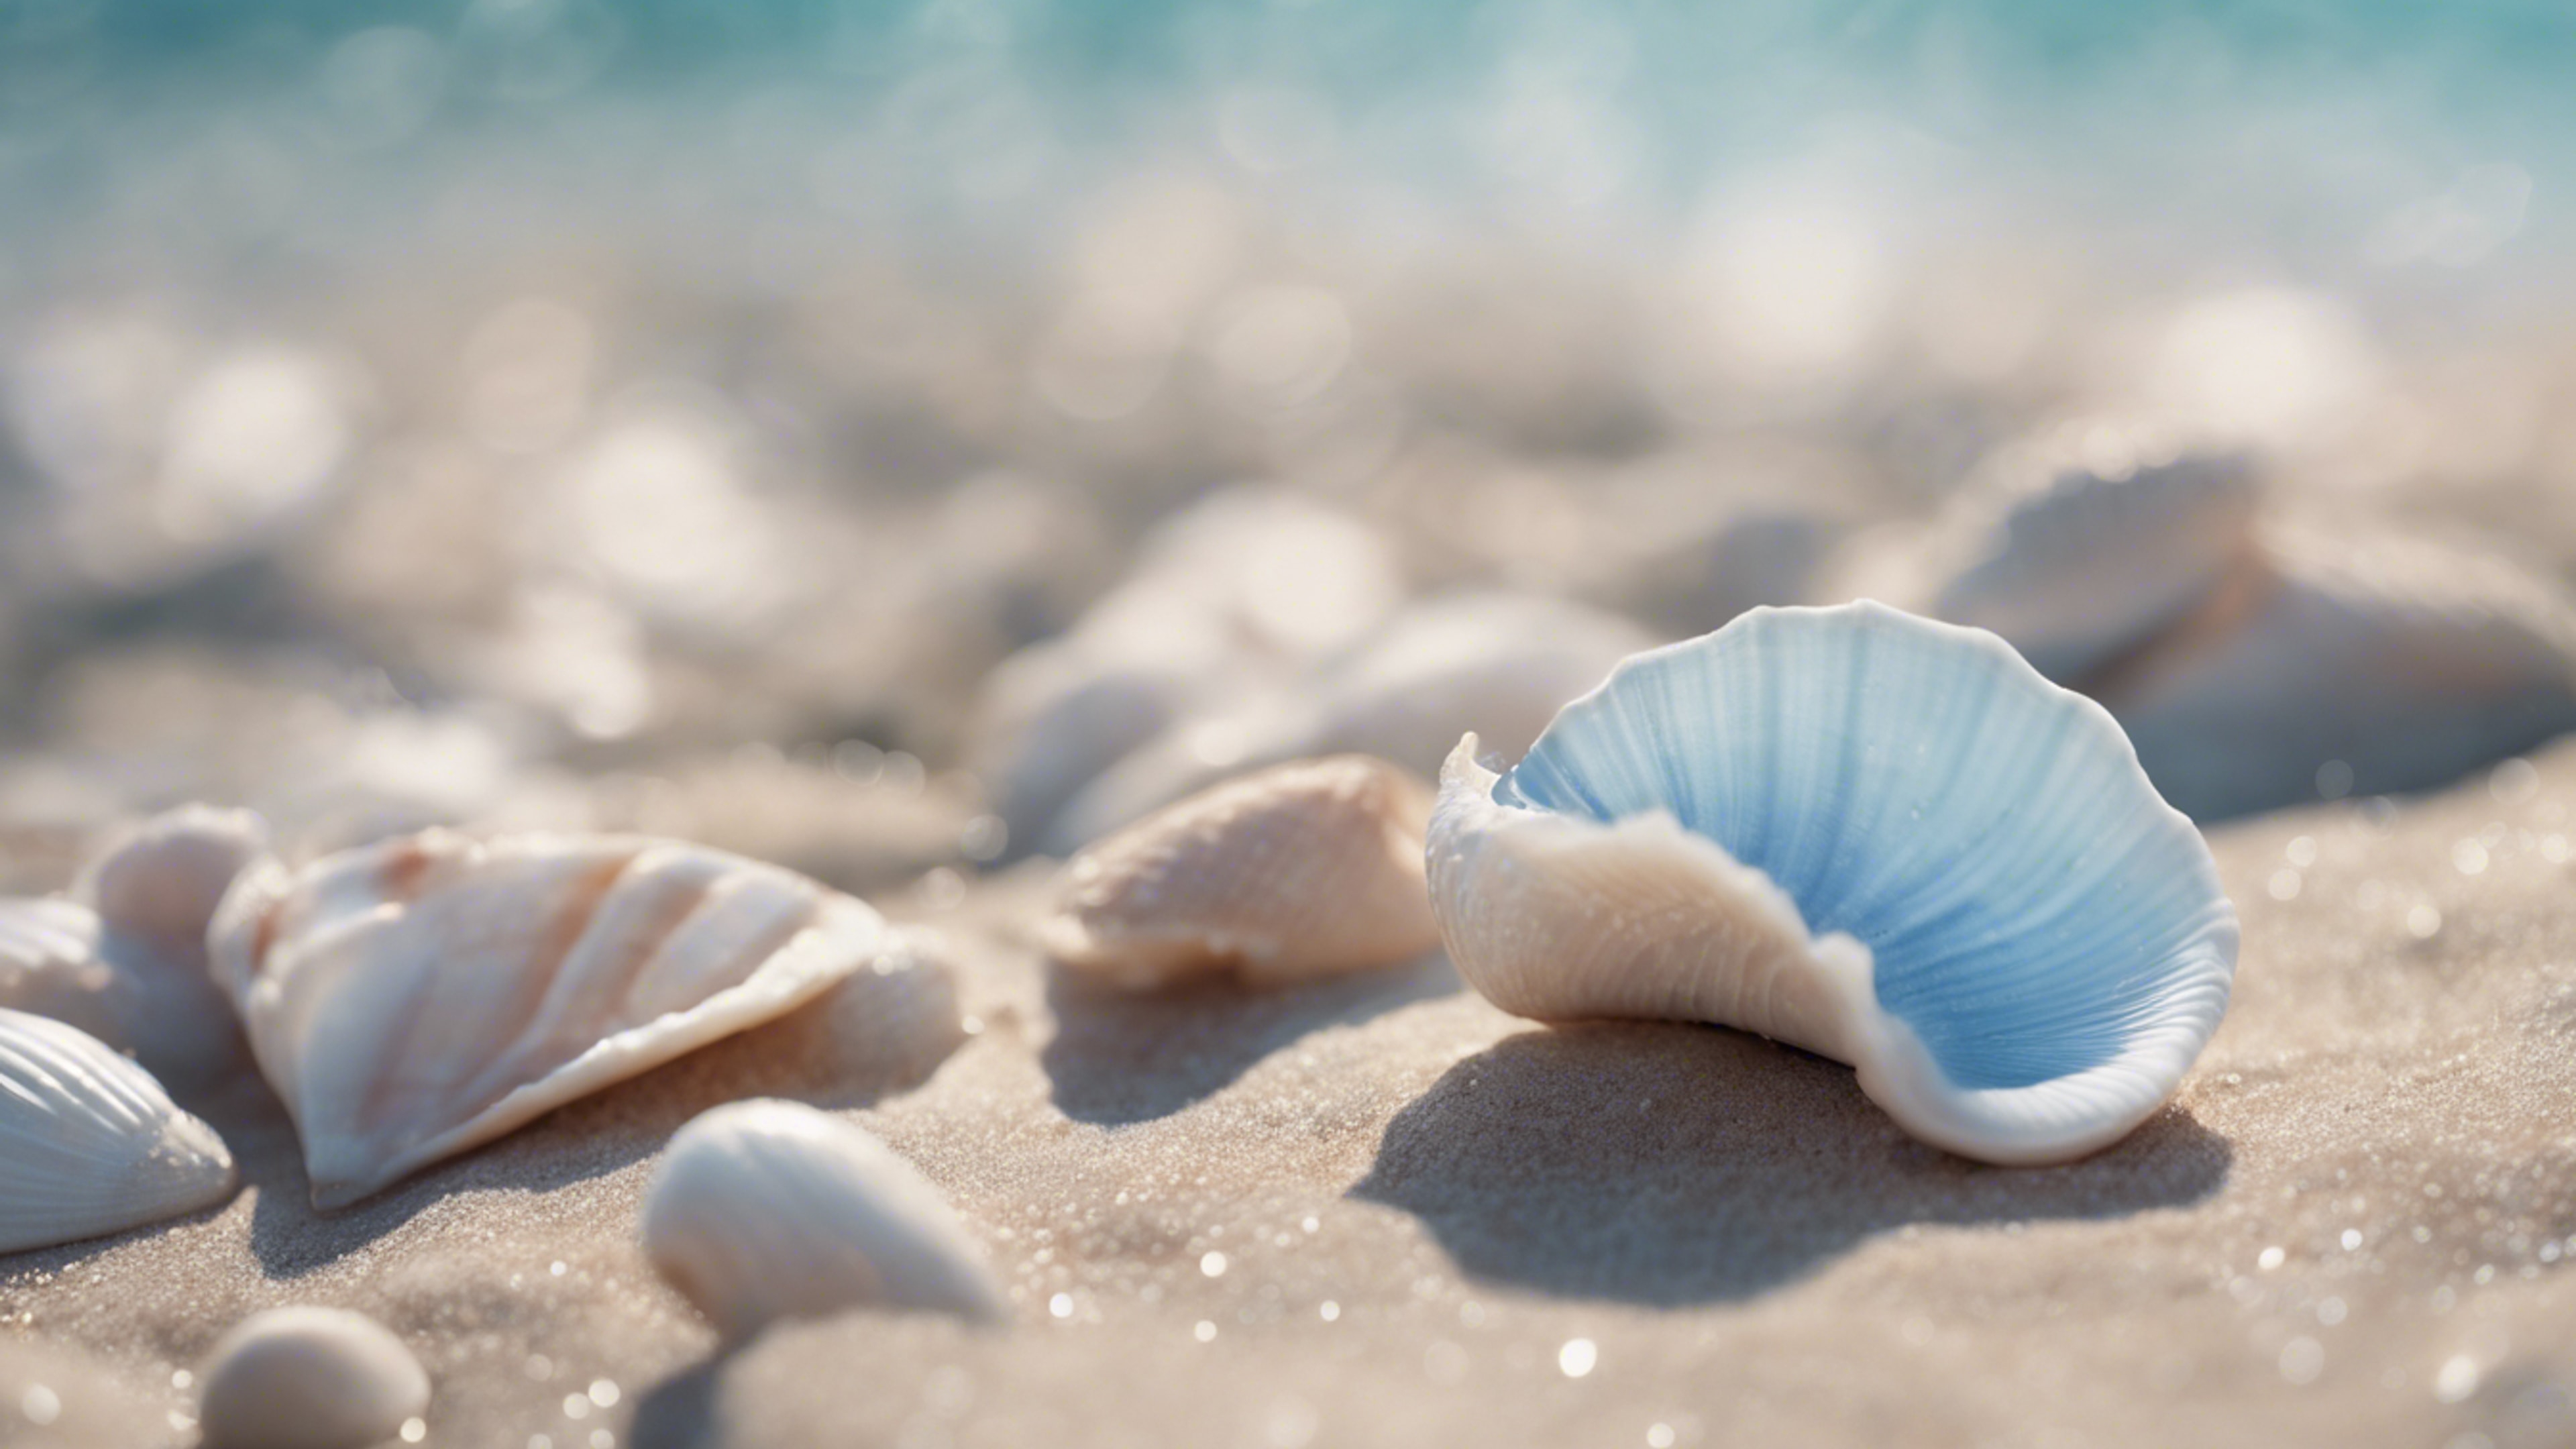 A close-up of a delicate, pastel blue seashell.壁紙[8c291a6533b34aba9c26]